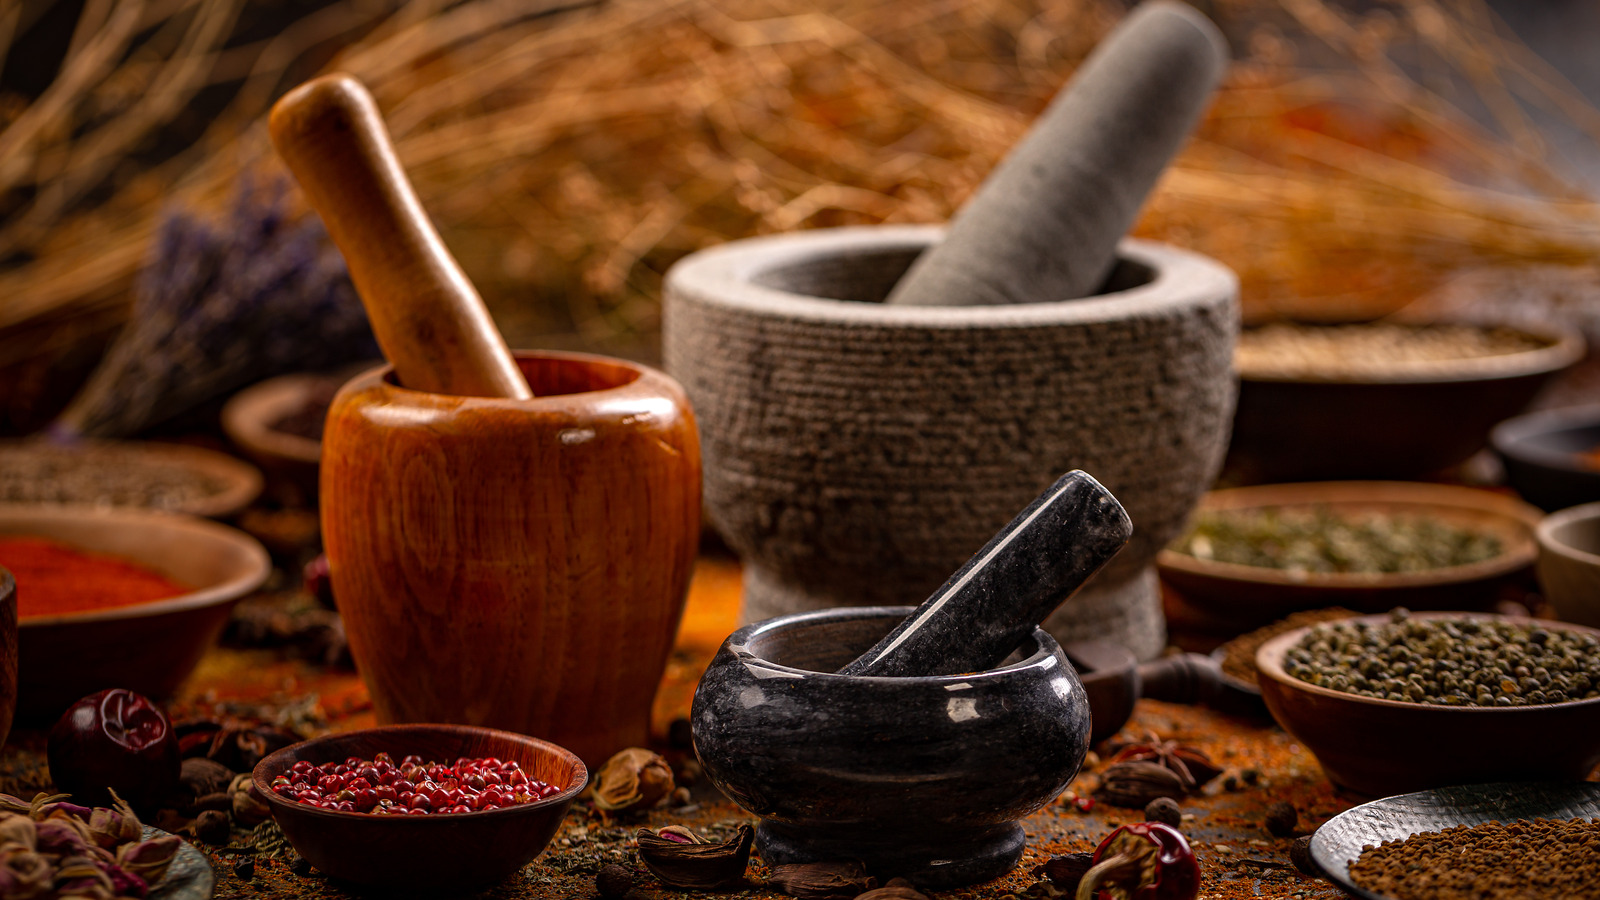 https://www.tastingtable.com/img/gallery/15-best-uses-for-your-mortar-and-pestle/l-intro-1663177263.jpg